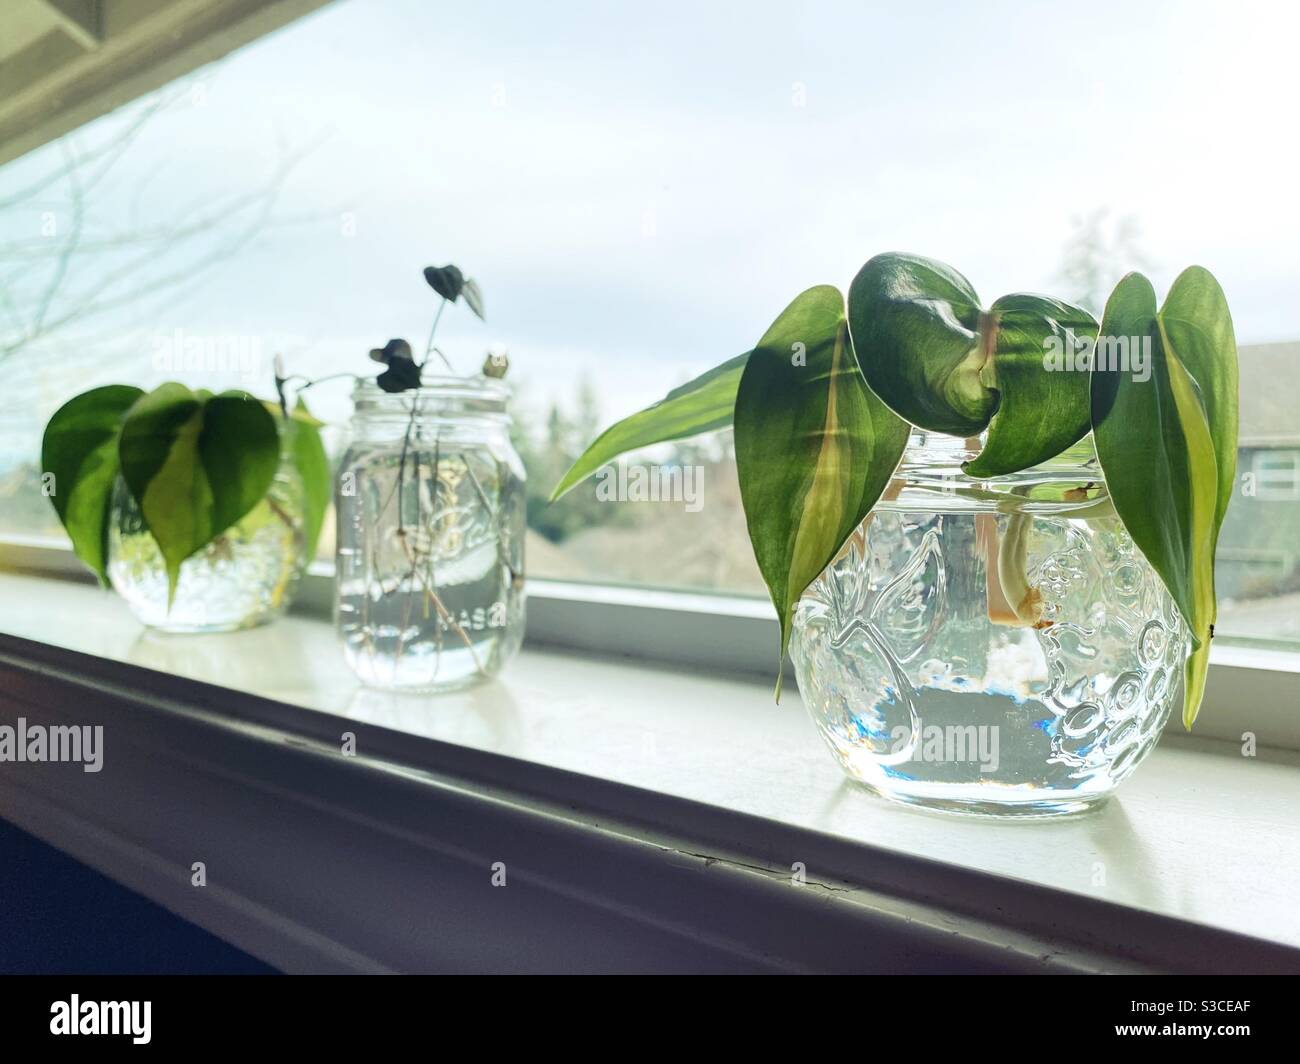 Cuttings from plants in water on a windowsill. Stock Photo